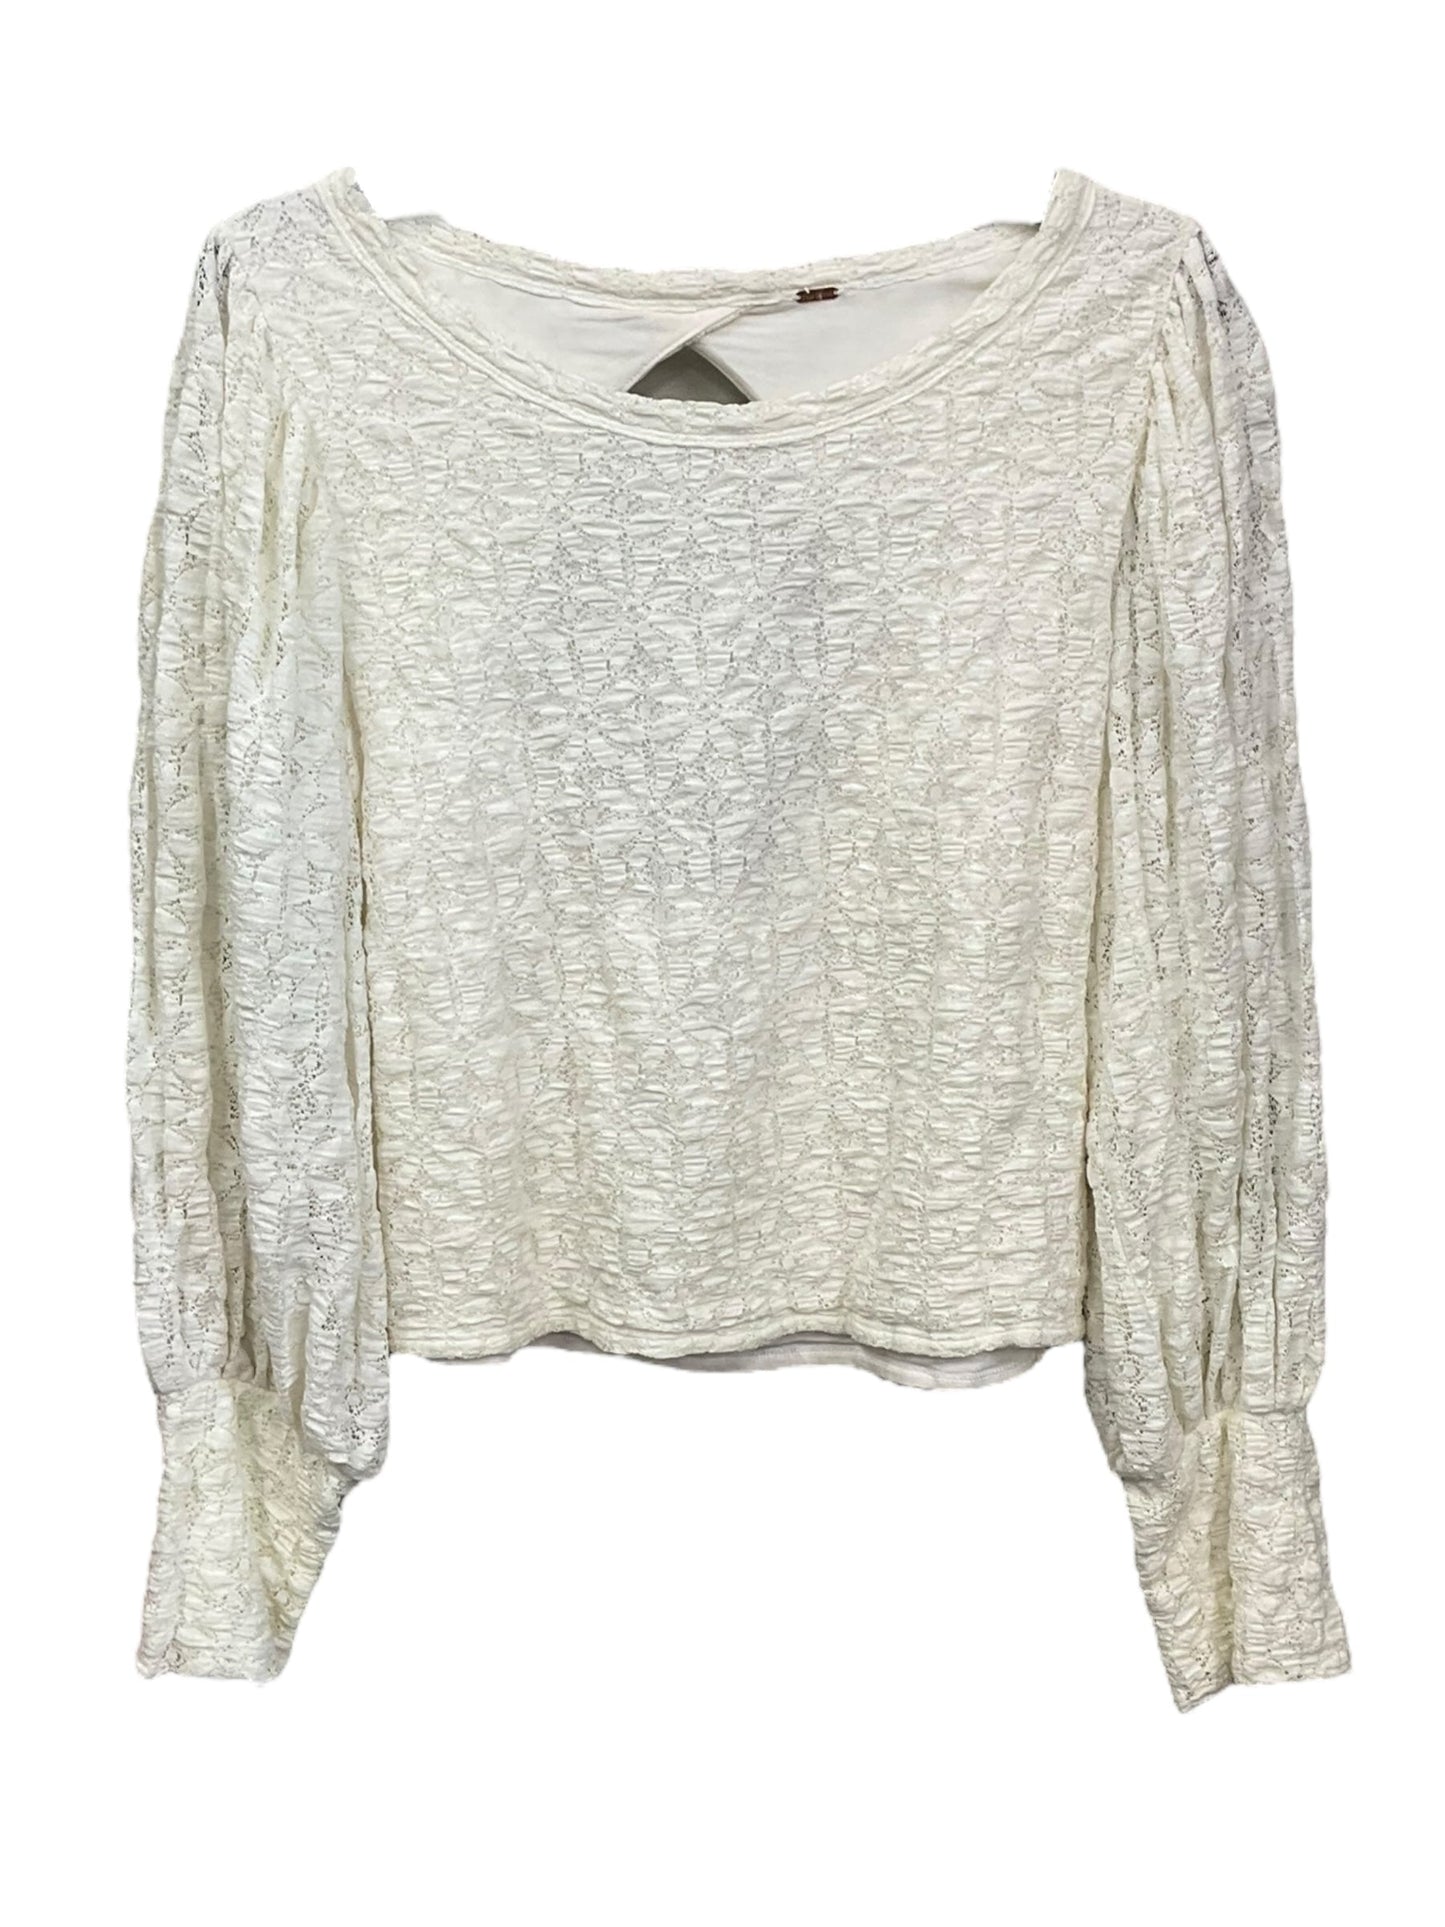 Cream Top Long Sleeve Free People, Size Xl